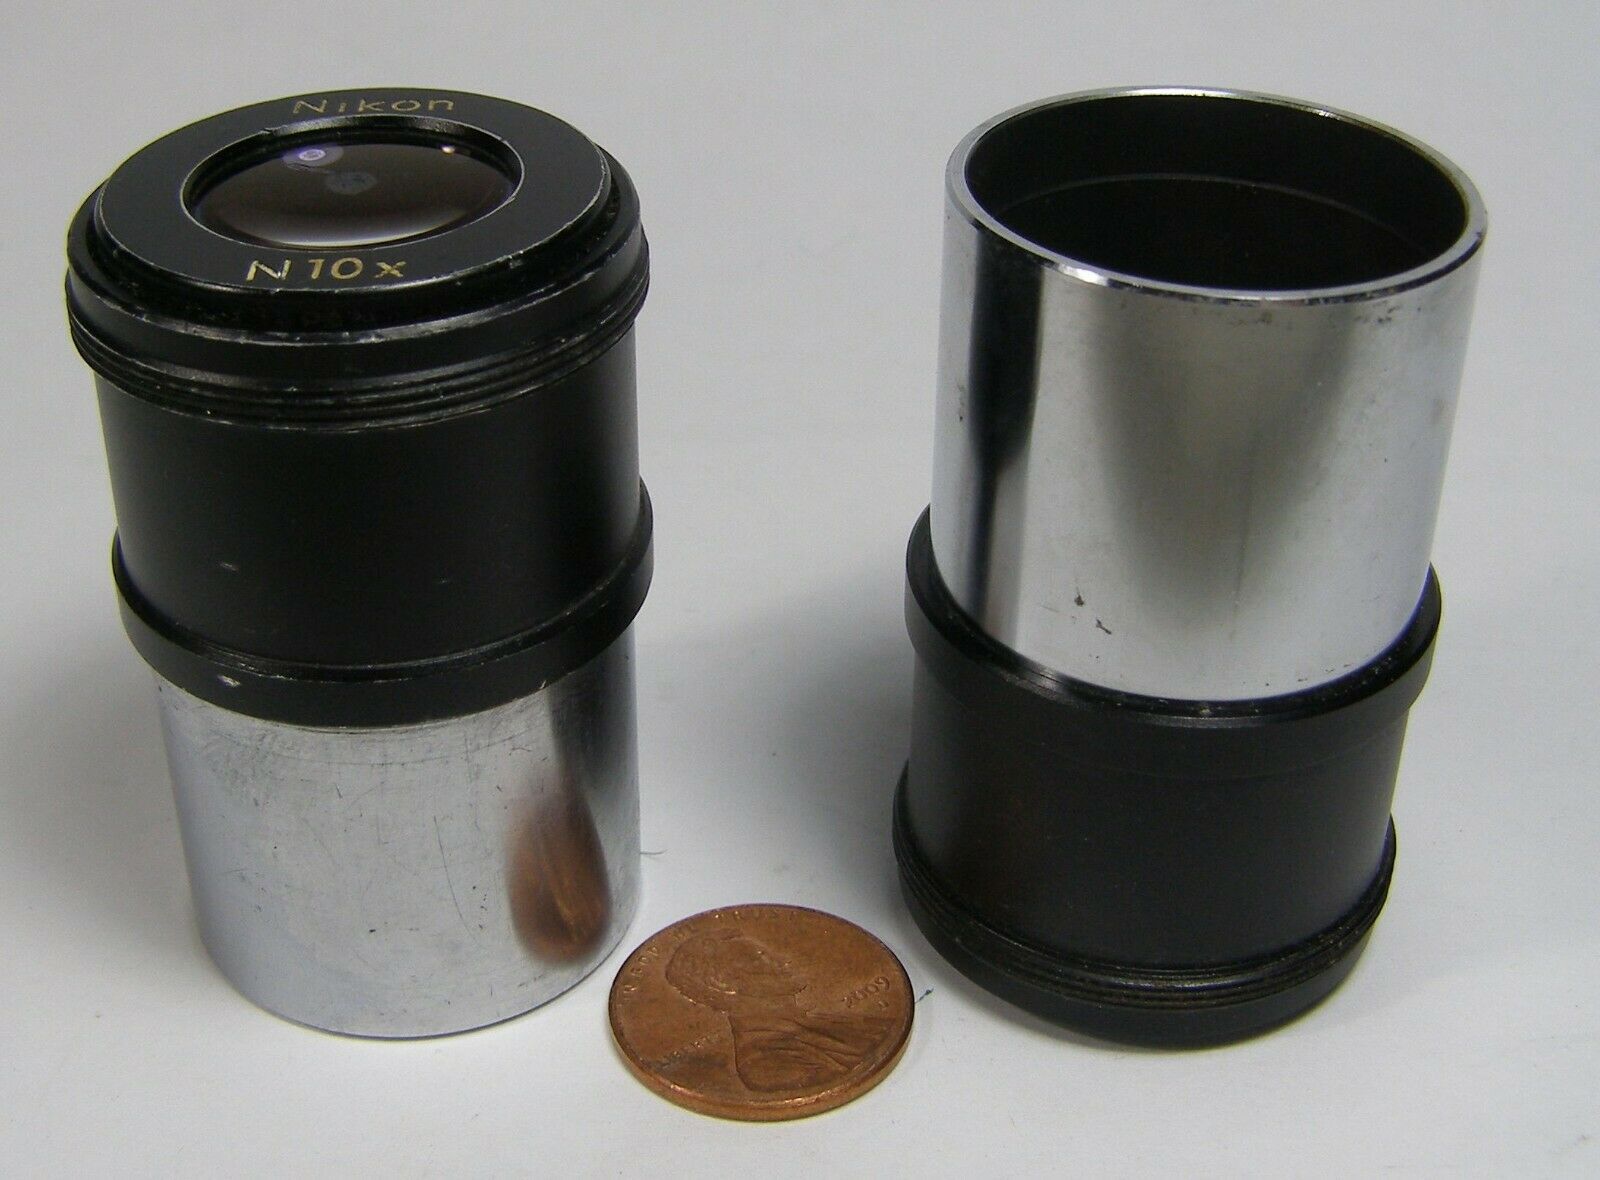 Primary image for Nikon Microscope Eyepieces 2ct.  N10X  one has a scratch-see pics